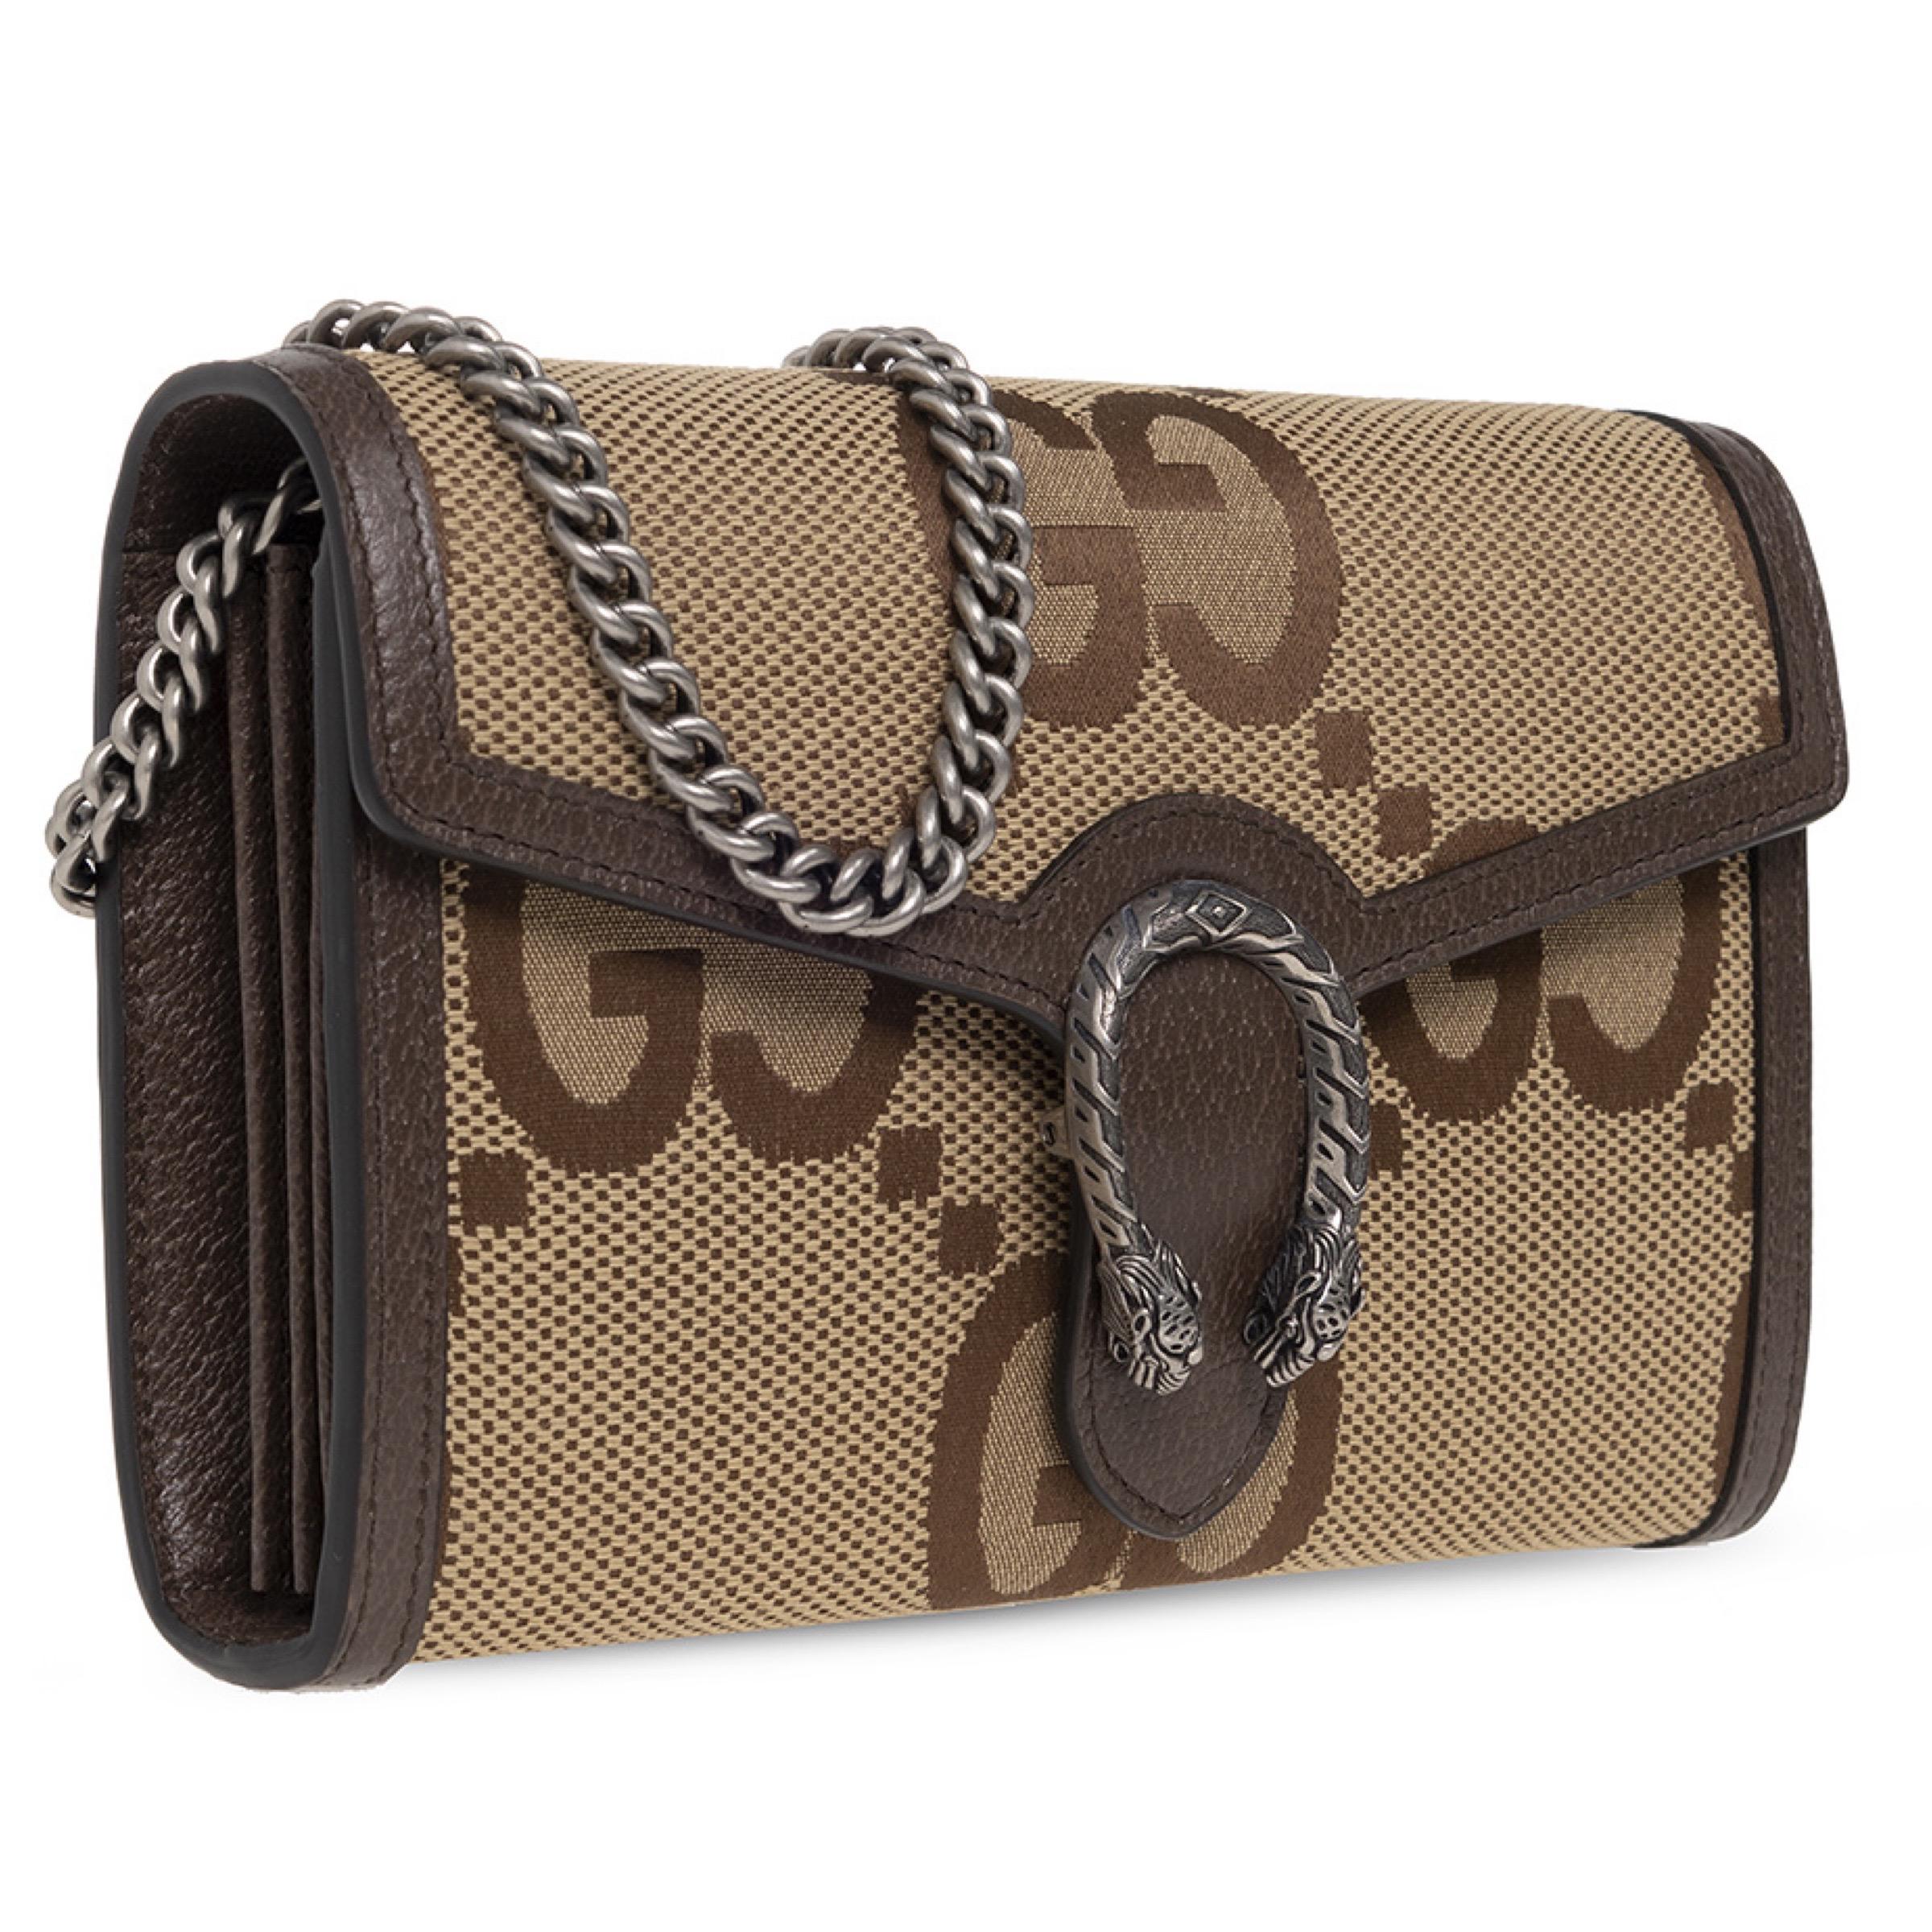 New Gucci Camel Ebony Dionysus Jumbo GG Canvas Wallet Crossbody Bag

Authenticity Guaranteed

DETAILS
Brand: Gucci
Condition: Brand new
Gender: Women
Category: Crossbody bag
Color: Camel ebony
Material: Leather
Monogram GG pattern
Silver-tone